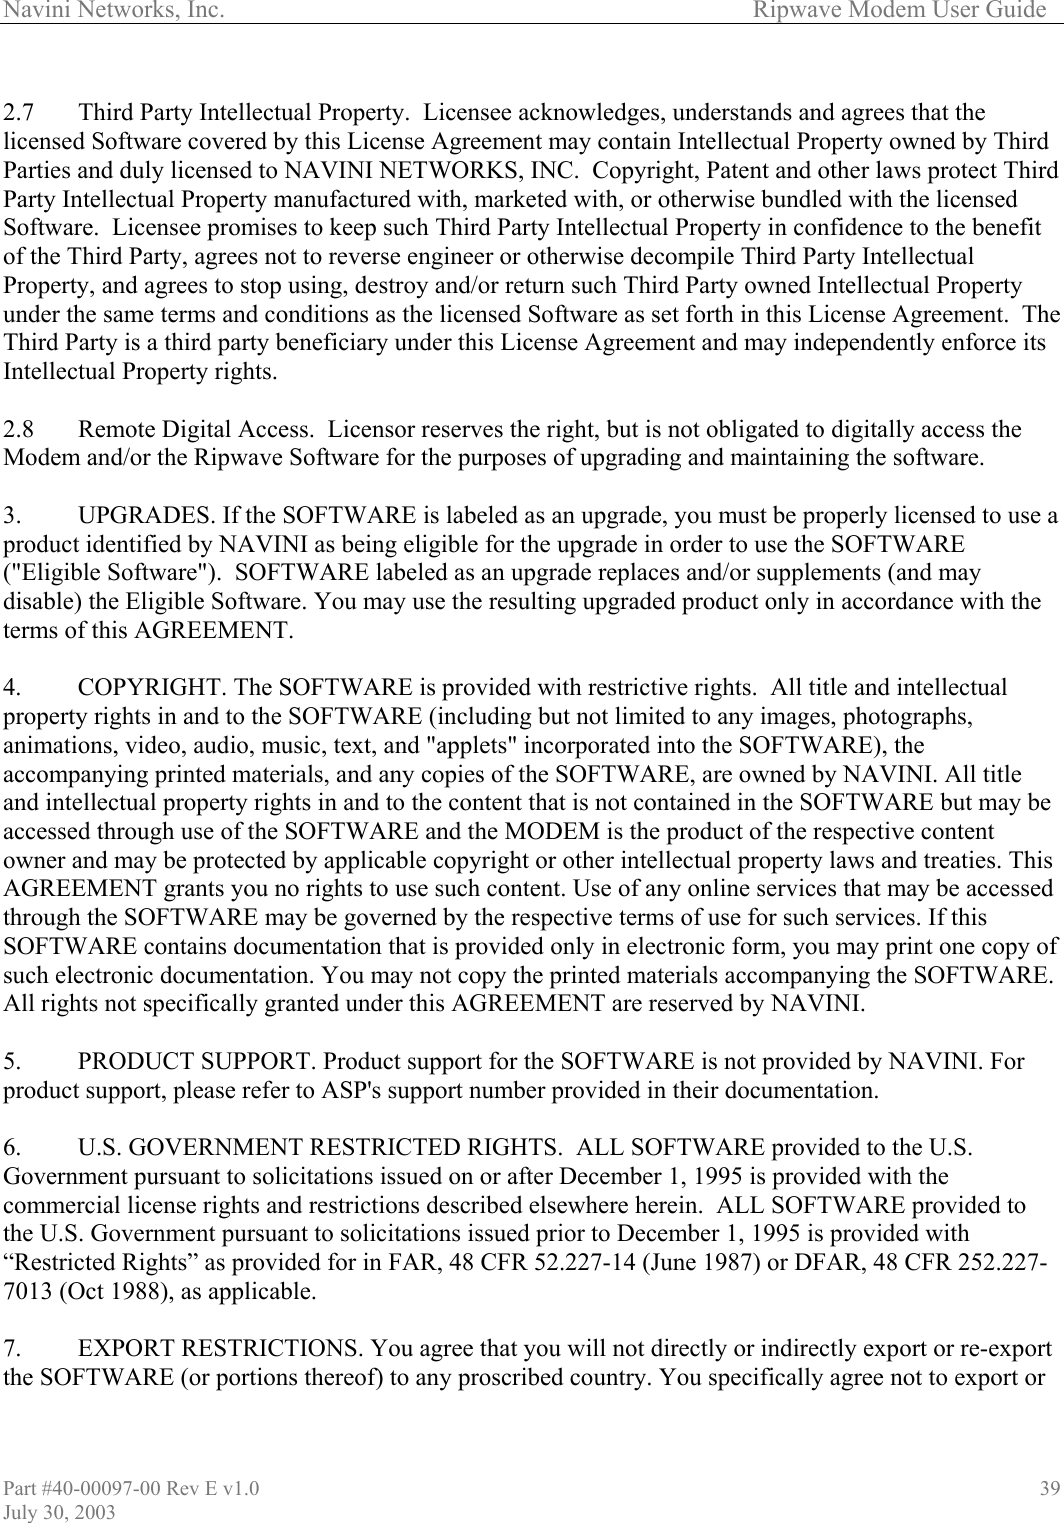 Navini Networks, Inc.        Ripwave Modem User Guide Part #40-00097-00 Rev E v1.0 July 30, 2003 39 2.7  Third Party Intellectual Property.  Licensee acknowledges, understands and agrees that the licensed Software covered by this License Agreement may contain Intellectual Property owned by Third Parties and duly licensed to NAVINI NETWORKS, INC.  Copyright, Patent and other laws protect Third Party Intellectual Property manufactured with, marketed with, or otherwise bundled with the licensed Software.  Licensee promises to keep such Third Party Intellectual Property in confidence to the benefit of the Third Party, agrees not to reverse engineer or otherwise decompile Third Party Intellectual Property, and agrees to stop using, destroy and/or return such Third Party owned Intellectual Property under the same terms and conditions as the licensed Software as set forth in this License Agreement.  The Third Party is a third party beneficiary under this License Agreement and may independently enforce its Intellectual Property rights.  2.8  Remote Digital Access.  Licensor reserves the right, but is not obligated to digitally access the Modem and/or the Ripwave Software for the purposes of upgrading and maintaining the software.  3.  UPGRADES. If the SOFTWARE is labeled as an upgrade, you must be properly licensed to use a product identified by NAVINI as being eligible for the upgrade in order to use the SOFTWARE (&quot;Eligible Software&quot;).  SOFTWARE labeled as an upgrade replaces and/or supplements (and may disable) the Eligible Software. You may use the resulting upgraded product only in accordance with the terms of this AGREEMENT.   4.  COPYRIGHT. The SOFTWARE is provided with restrictive rights.  All title and intellectual property rights in and to the SOFTWARE (including but not limited to any images, photographs, animations, video, audio, music, text, and &quot;applets&quot; incorporated into the SOFTWARE), the accompanying printed materials, and any copies of the SOFTWARE, are owned by NAVINI. All title and intellectual property rights in and to the content that is not contained in the SOFTWARE but may be accessed through use of the SOFTWARE and the MODEM is the product of the respective content owner and may be protected by applicable copyright or other intellectual property laws and treaties. This AGREEMENT grants you no rights to use such content. Use of any online services that may be accessed through the SOFTWARE may be governed by the respective terms of use for such services. If this SOFTWARE contains documentation that is provided only in electronic form, you may print one copy of such electronic documentation. You may not copy the printed materials accompanying the SOFTWARE. All rights not specifically granted under this AGREEMENT are reserved by NAVINI.  5.  PRODUCT SUPPORT. Product support for the SOFTWARE is not provided by NAVINI. For product support, please refer to ASP&apos;s support number provided in their documentation.  6.  U.S. GOVERNMENT RESTRICTED RIGHTS.  ALL SOFTWARE provided to the U.S. Government pursuant to solicitations issued on or after December 1, 1995 is provided with the commercial license rights and restrictions described elsewhere herein.  ALL SOFTWARE provided to the U.S. Government pursuant to solicitations issued prior to December 1, 1995 is provided with “Restricted Rights” as provided for in FAR, 48 CFR 52.227-14 (June 1987) or DFAR, 48 CFR 252.227-7013 (Oct 1988), as applicable.  7.  EXPORT RESTRICTIONS. You agree that you will not directly or indirectly export or re-export the SOFTWARE (or portions thereof) to any proscribed country. You specifically agree not to export or 